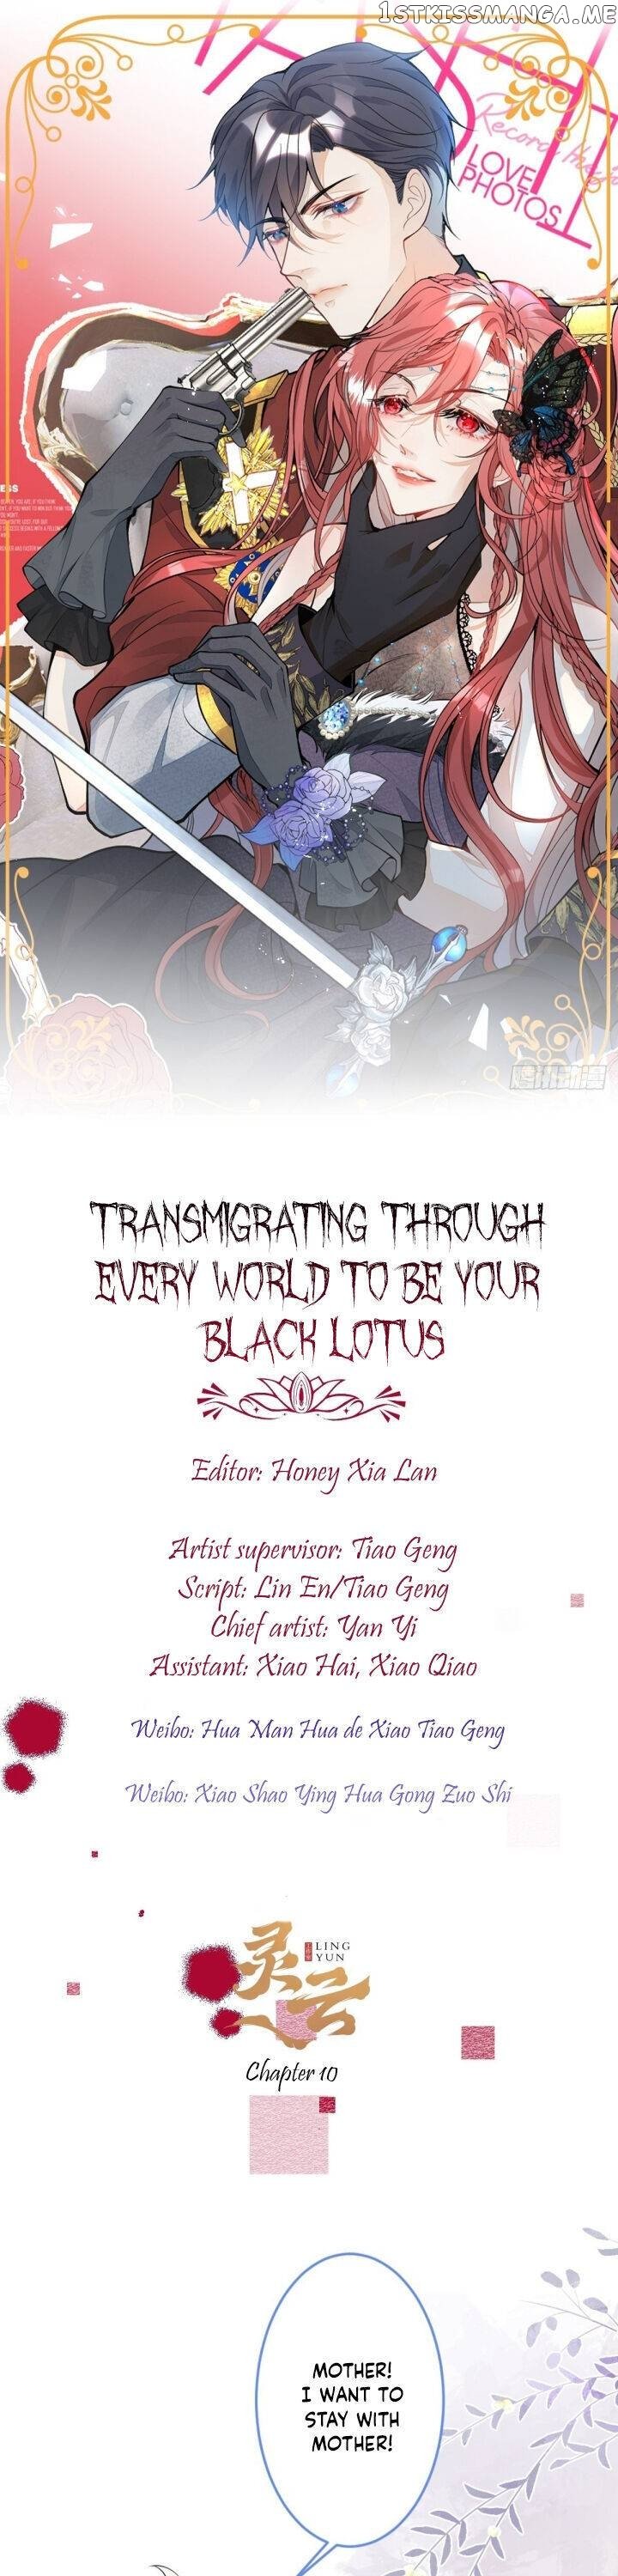 Transmigrating Through Every World To Be Your Black Lotus chapter 10